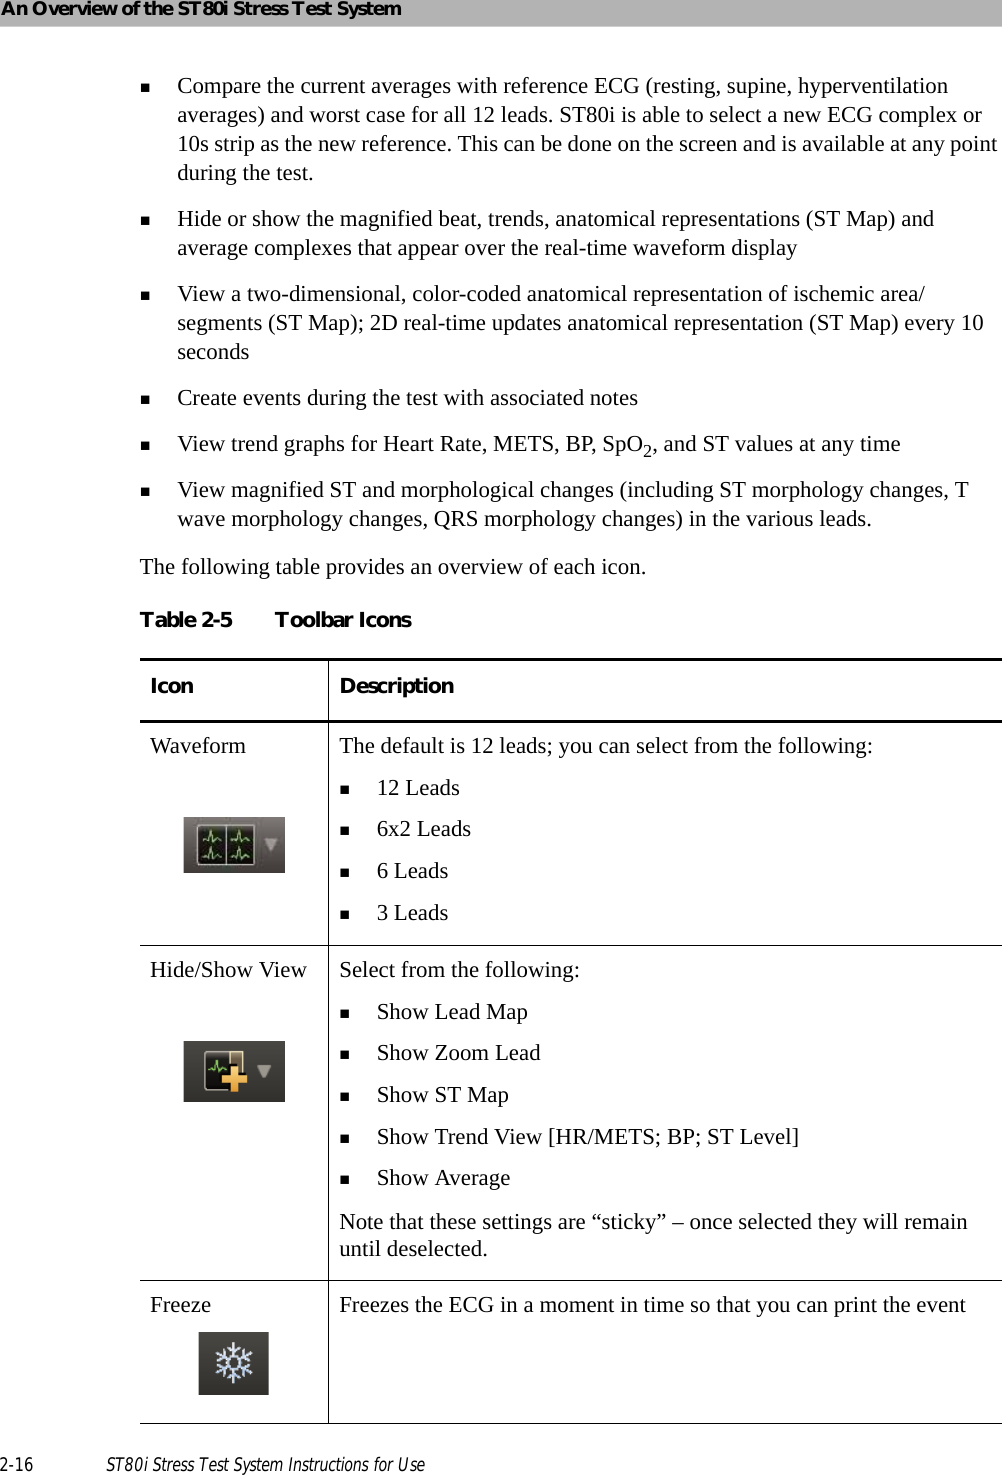 An Overview of the ST80i Stress Test System2-16 ST80i Stress Test System Instructions for UseCompare the current averages with reference ECG (resting, supine, hyperventilation averages) and worst case for all 12 leads. ST80i is able to select a new ECG complex or 10s strip as the new reference. This can be done on the screen and is available at any point during the test. Hide or show the magnified beat, trends, anatomical representations (ST Map) and average complexes that appear over the real-time waveform displayView a two-dimensional, color-coded anatomical representation of ischemic area/segments (ST Map); 2D real-time updates anatomical representation (ST Map) every 10 seconds Create events during the test with associated notesView trend graphs for Heart Rate, METS, BP, SpO2, and ST values at any timeView magnified ST and morphological changes (including ST morphology changes, T wave morphology changes, QRS morphology changes) in the various leads.The following table provides an overview of each icon.Table 2-5 Toolbar IconsIcon DescriptionWaveform The default is 12 leads; you can select from the following:12 Leads6x2 Leads6 Leads3 LeadsHide/Show View Select from the following: Show Lead MapShow Zoom LeadShow ST MapShow Trend View [HR/METS; BP; ST Level]Show AverageNote that these settings are “sticky” – once selected they will remain until deselected.Freeze  Freezes the ECG in a moment in time so that you can print the event 